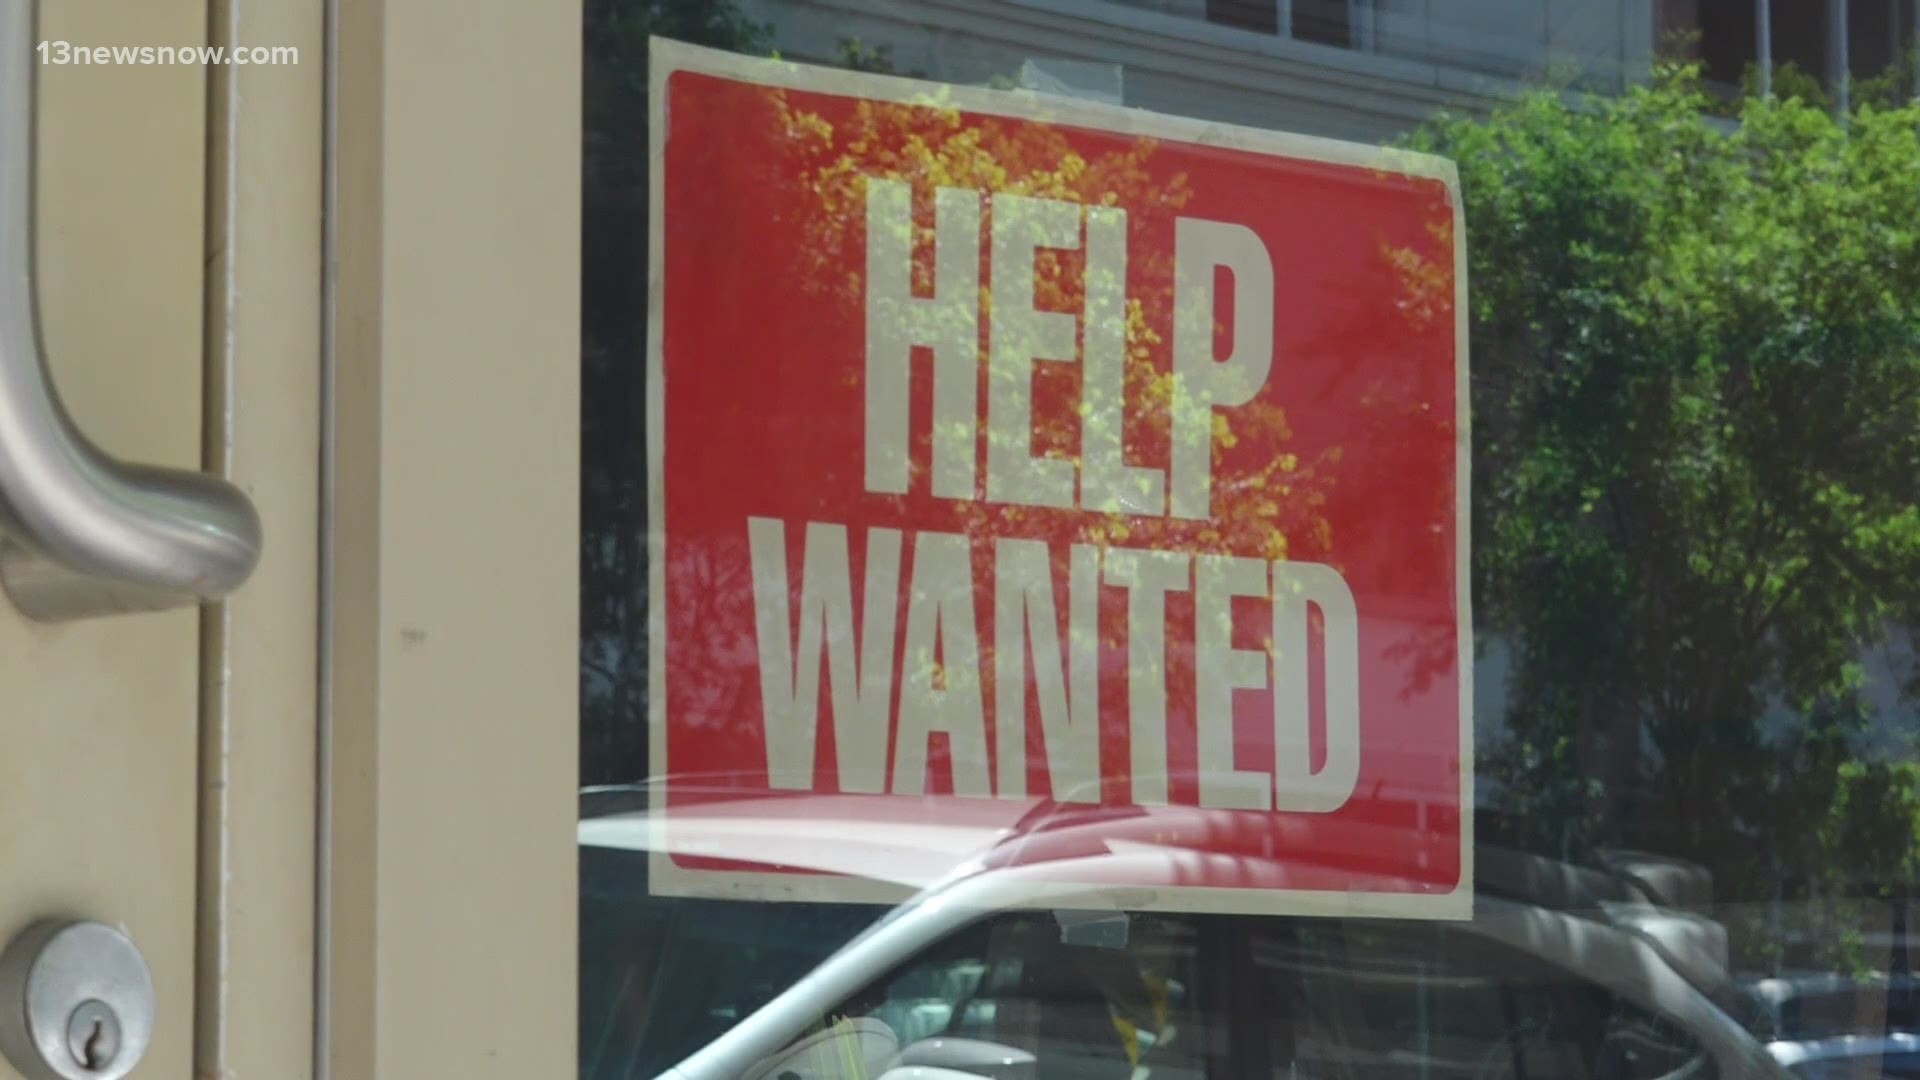 In late May, about 20 businesses in Town Center were looking to hire more people to work.